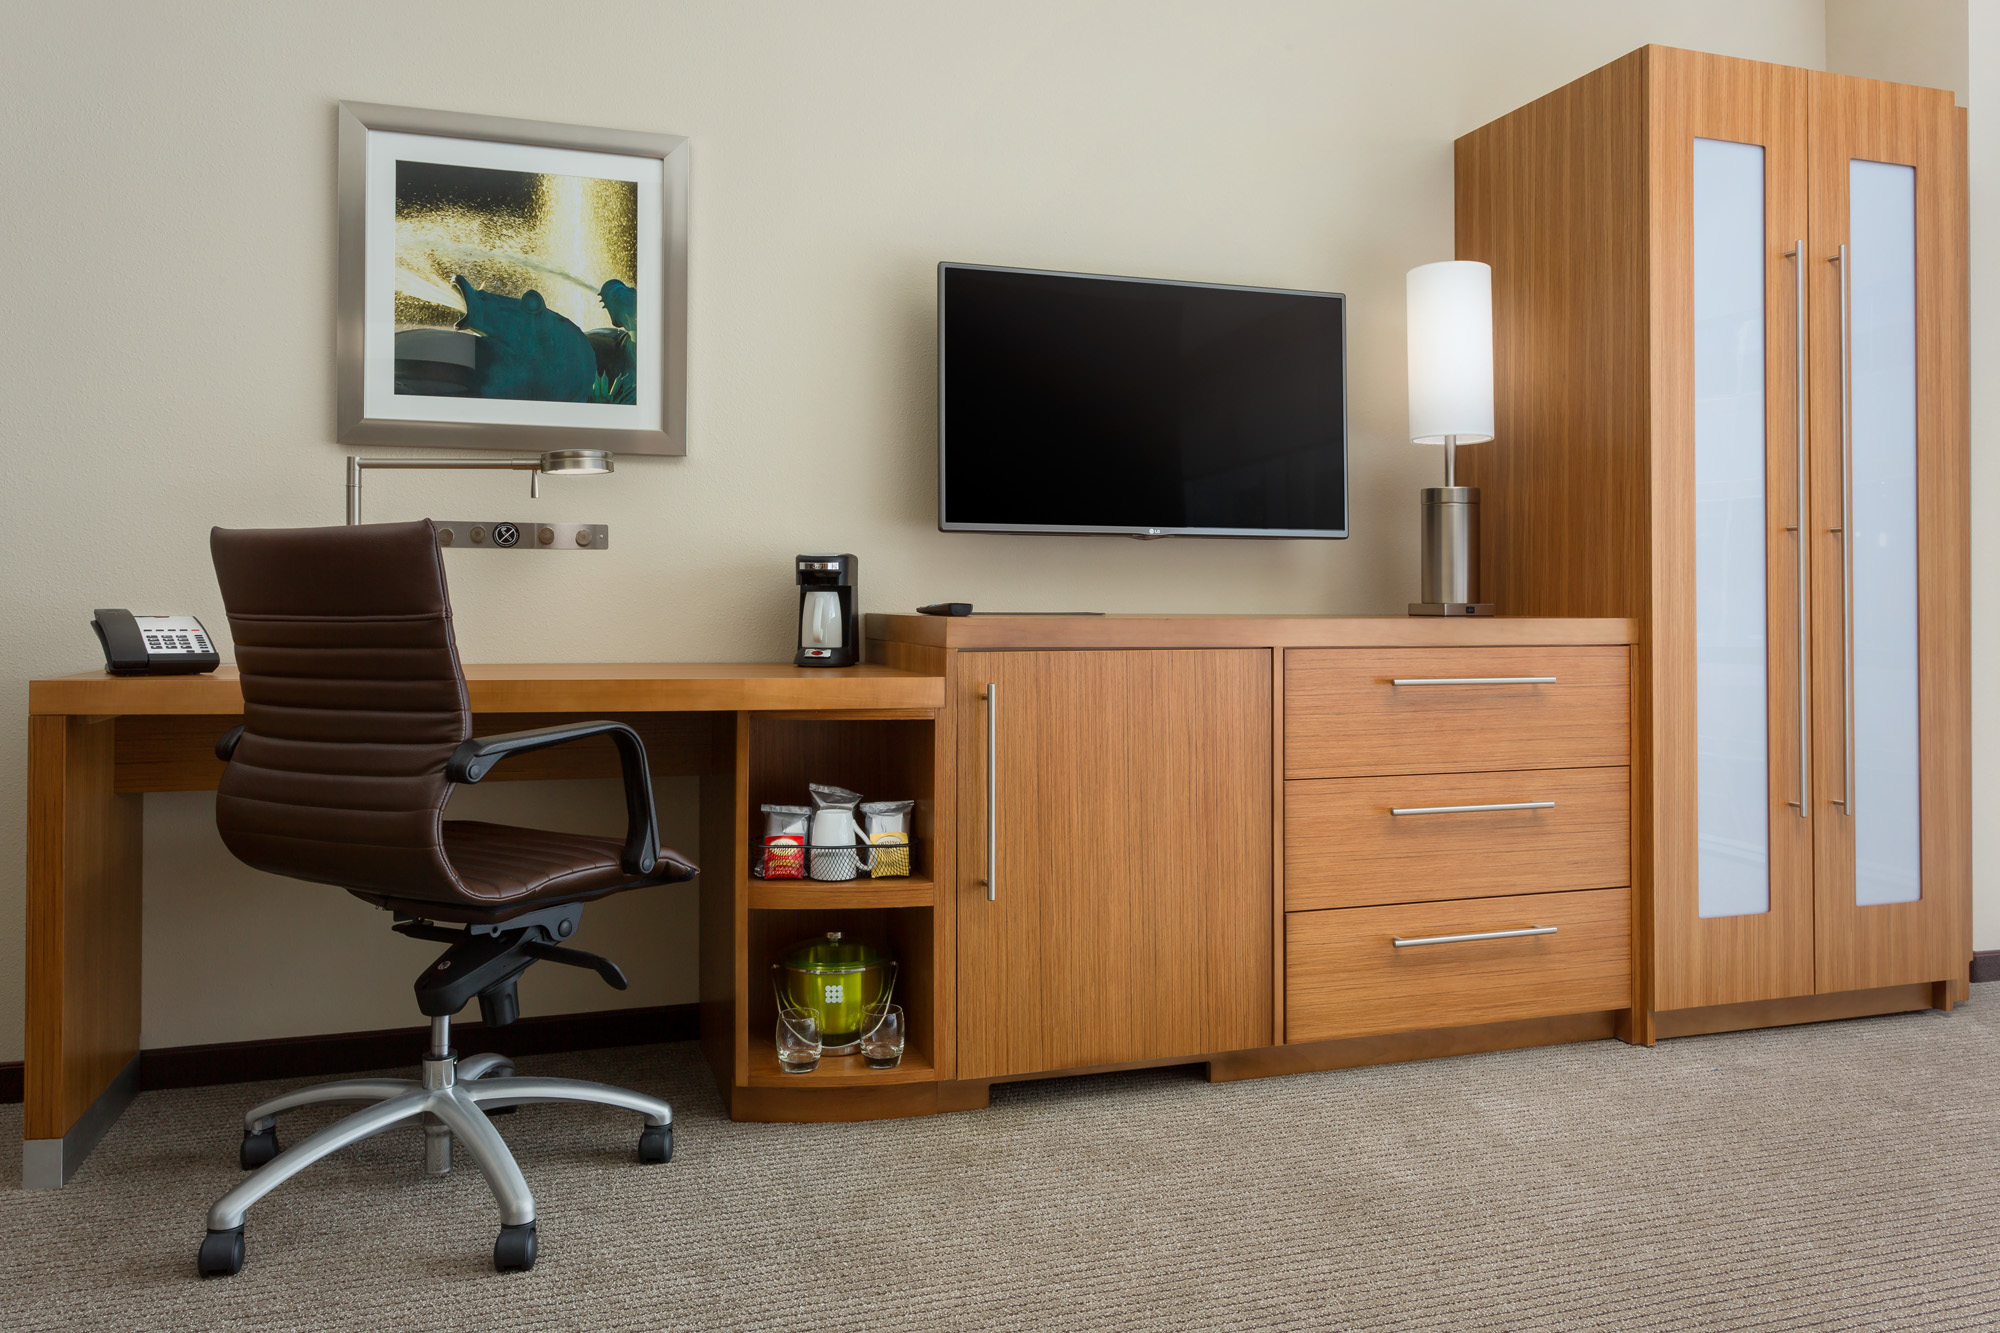 Hyatt Place Chicago Downtown - The Loop guest rooms feature free Wi-Fi, mini refrigerator, coffee maker and Cozy Corner sofa sleeper.